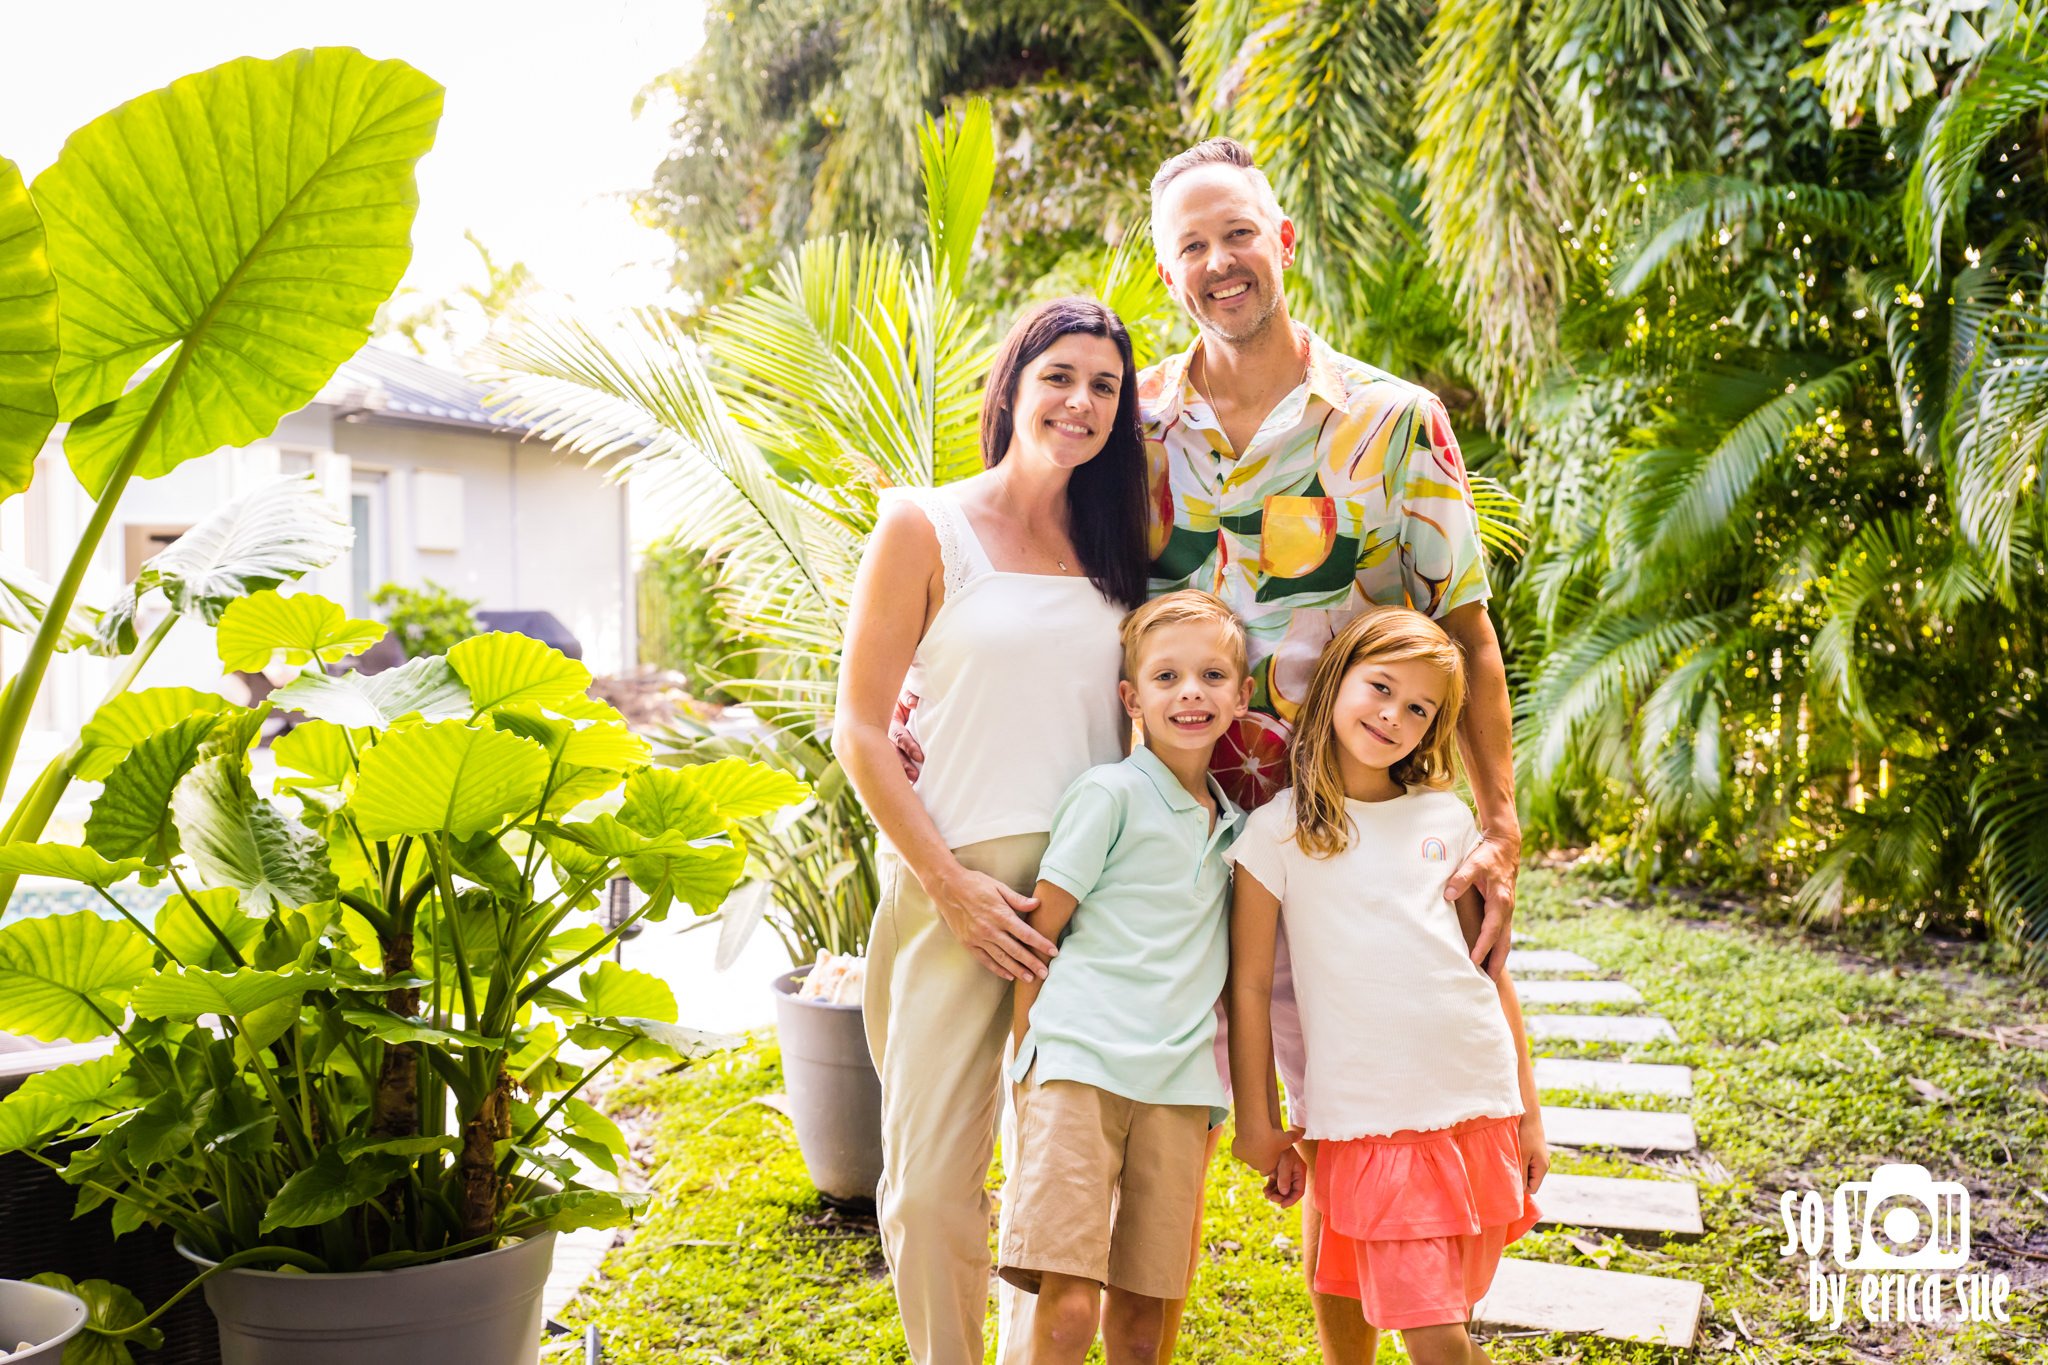 5-jury-fam-at-home-lifestyle-family-photographer-miami-fl-so-you-by-erica-sue-ES2_8021.jpg